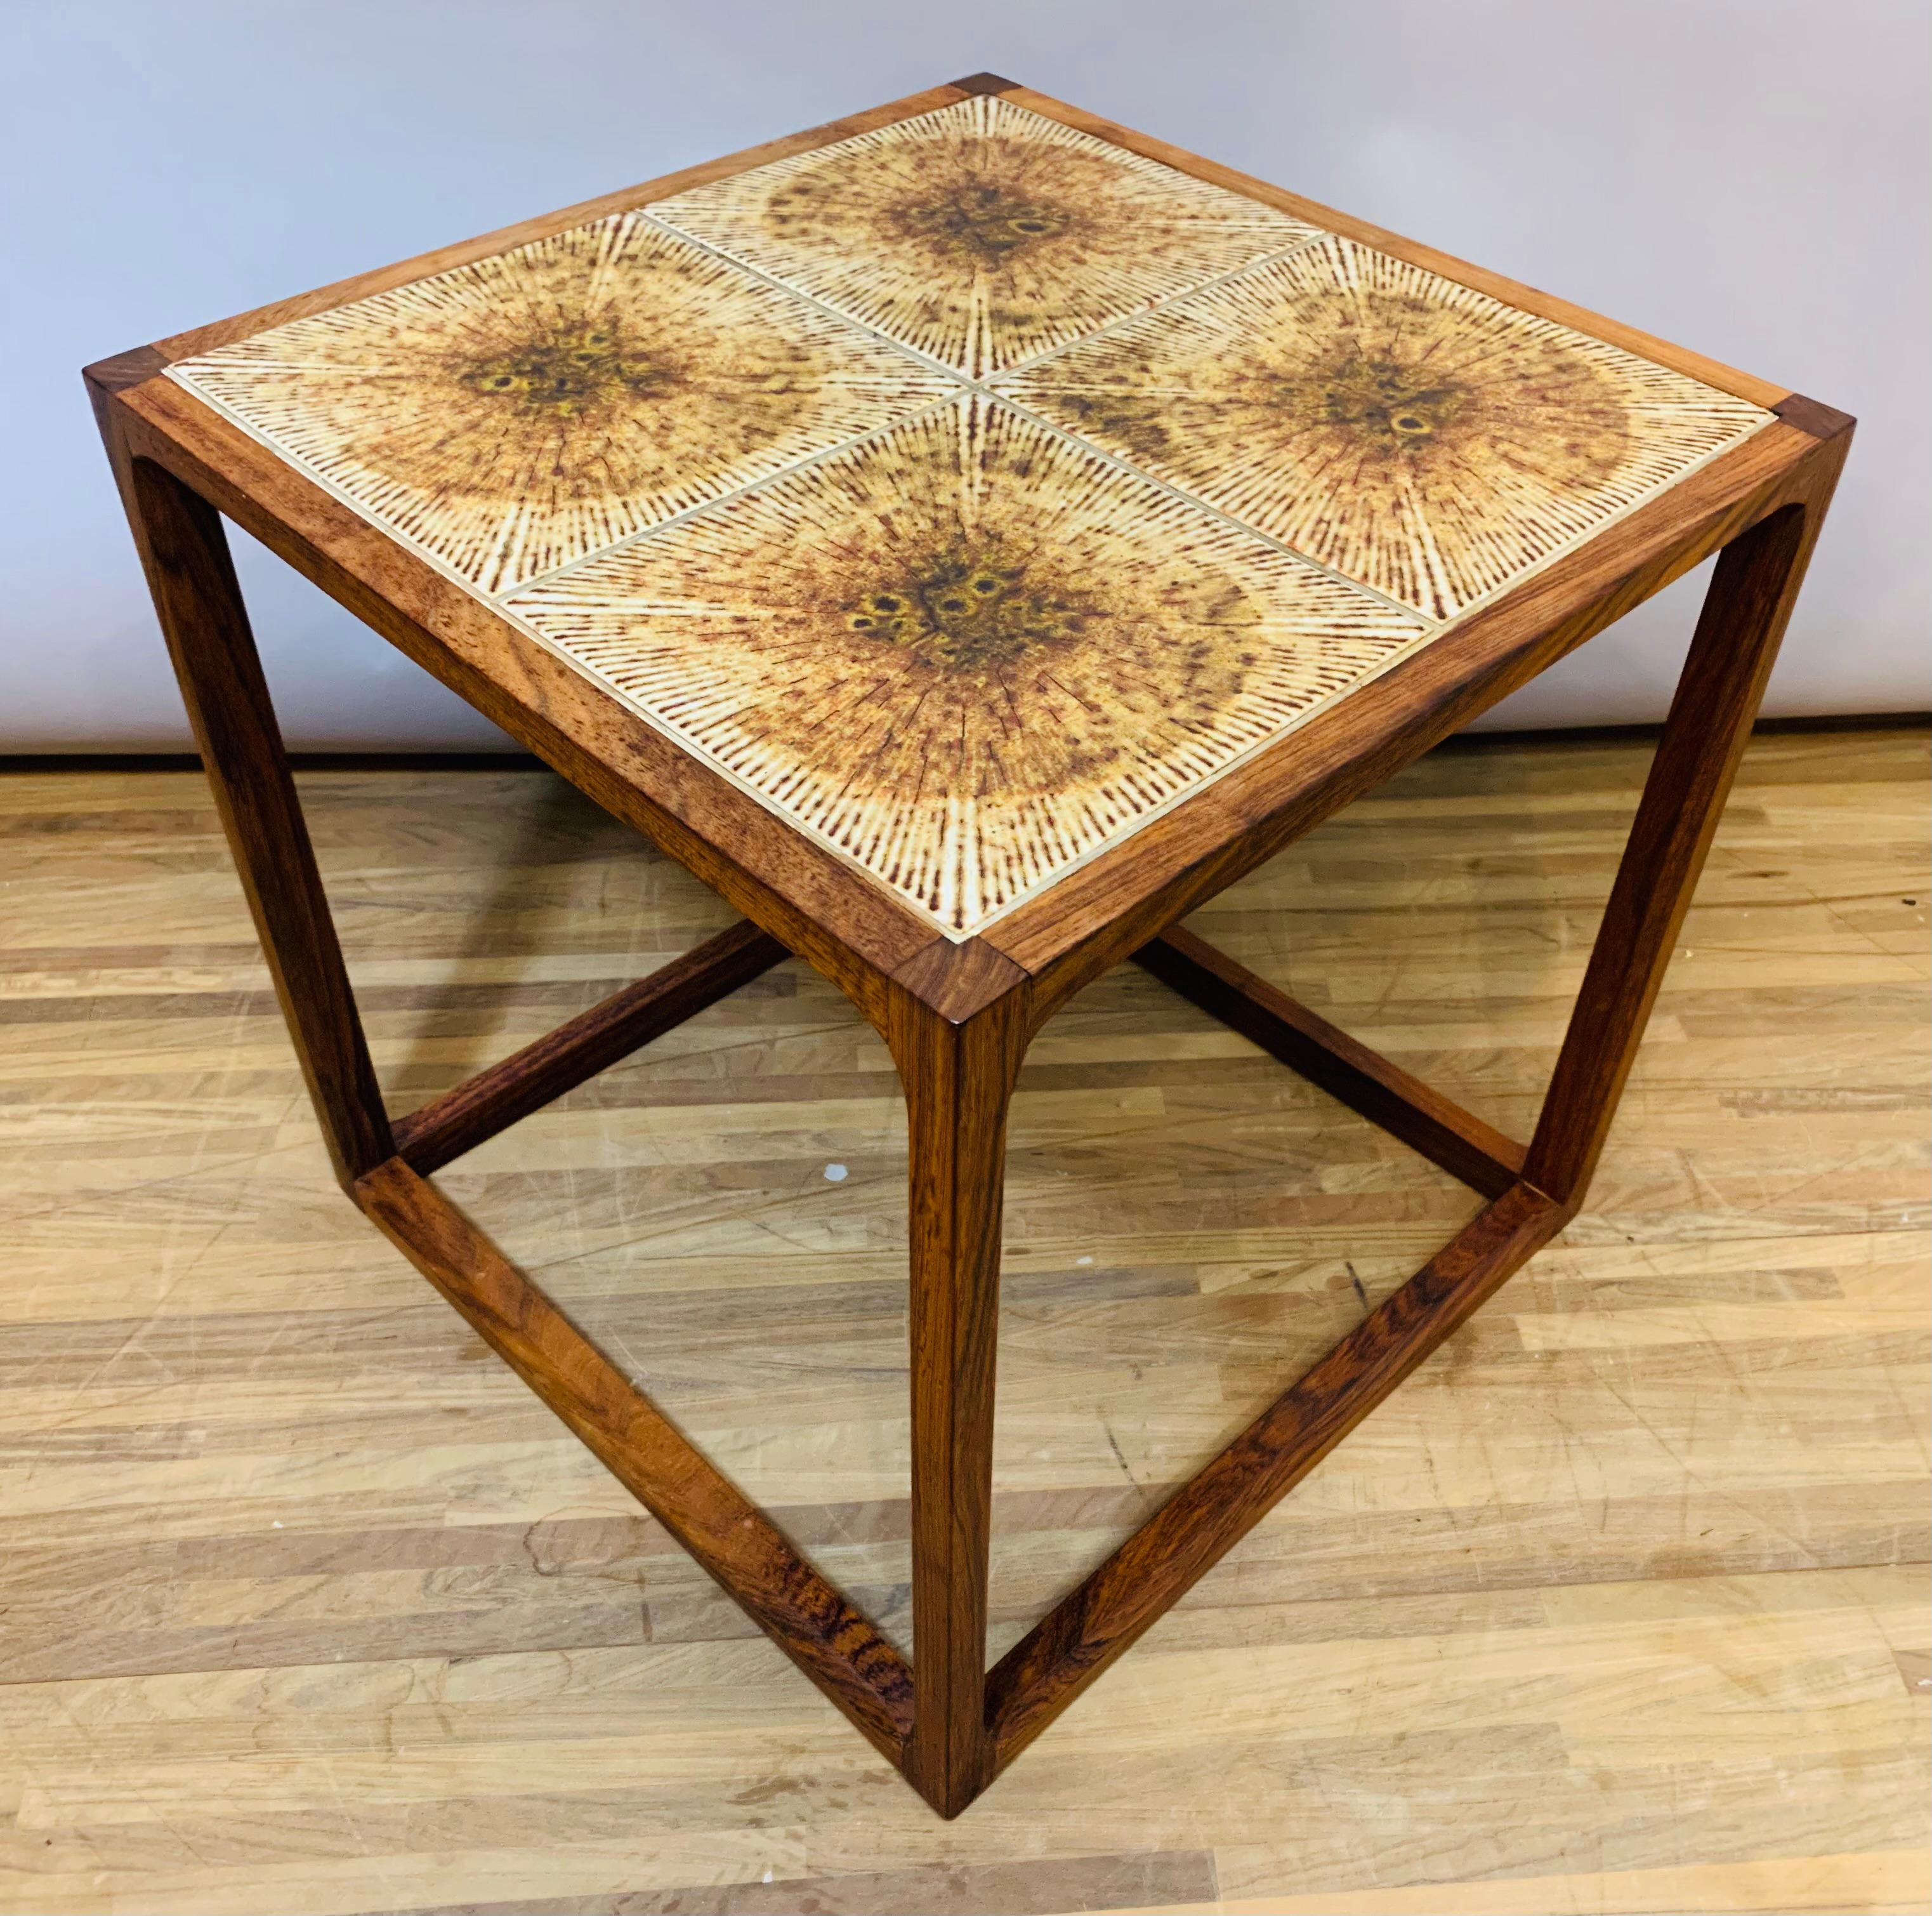 1960s Rosewood tiled topped cubic coffee table with feature chamfered legs and supports. The four brown original tiles compliment the Rosewood beautifully and are certainly of the period. The table is made with solid Rosewood on the legs and